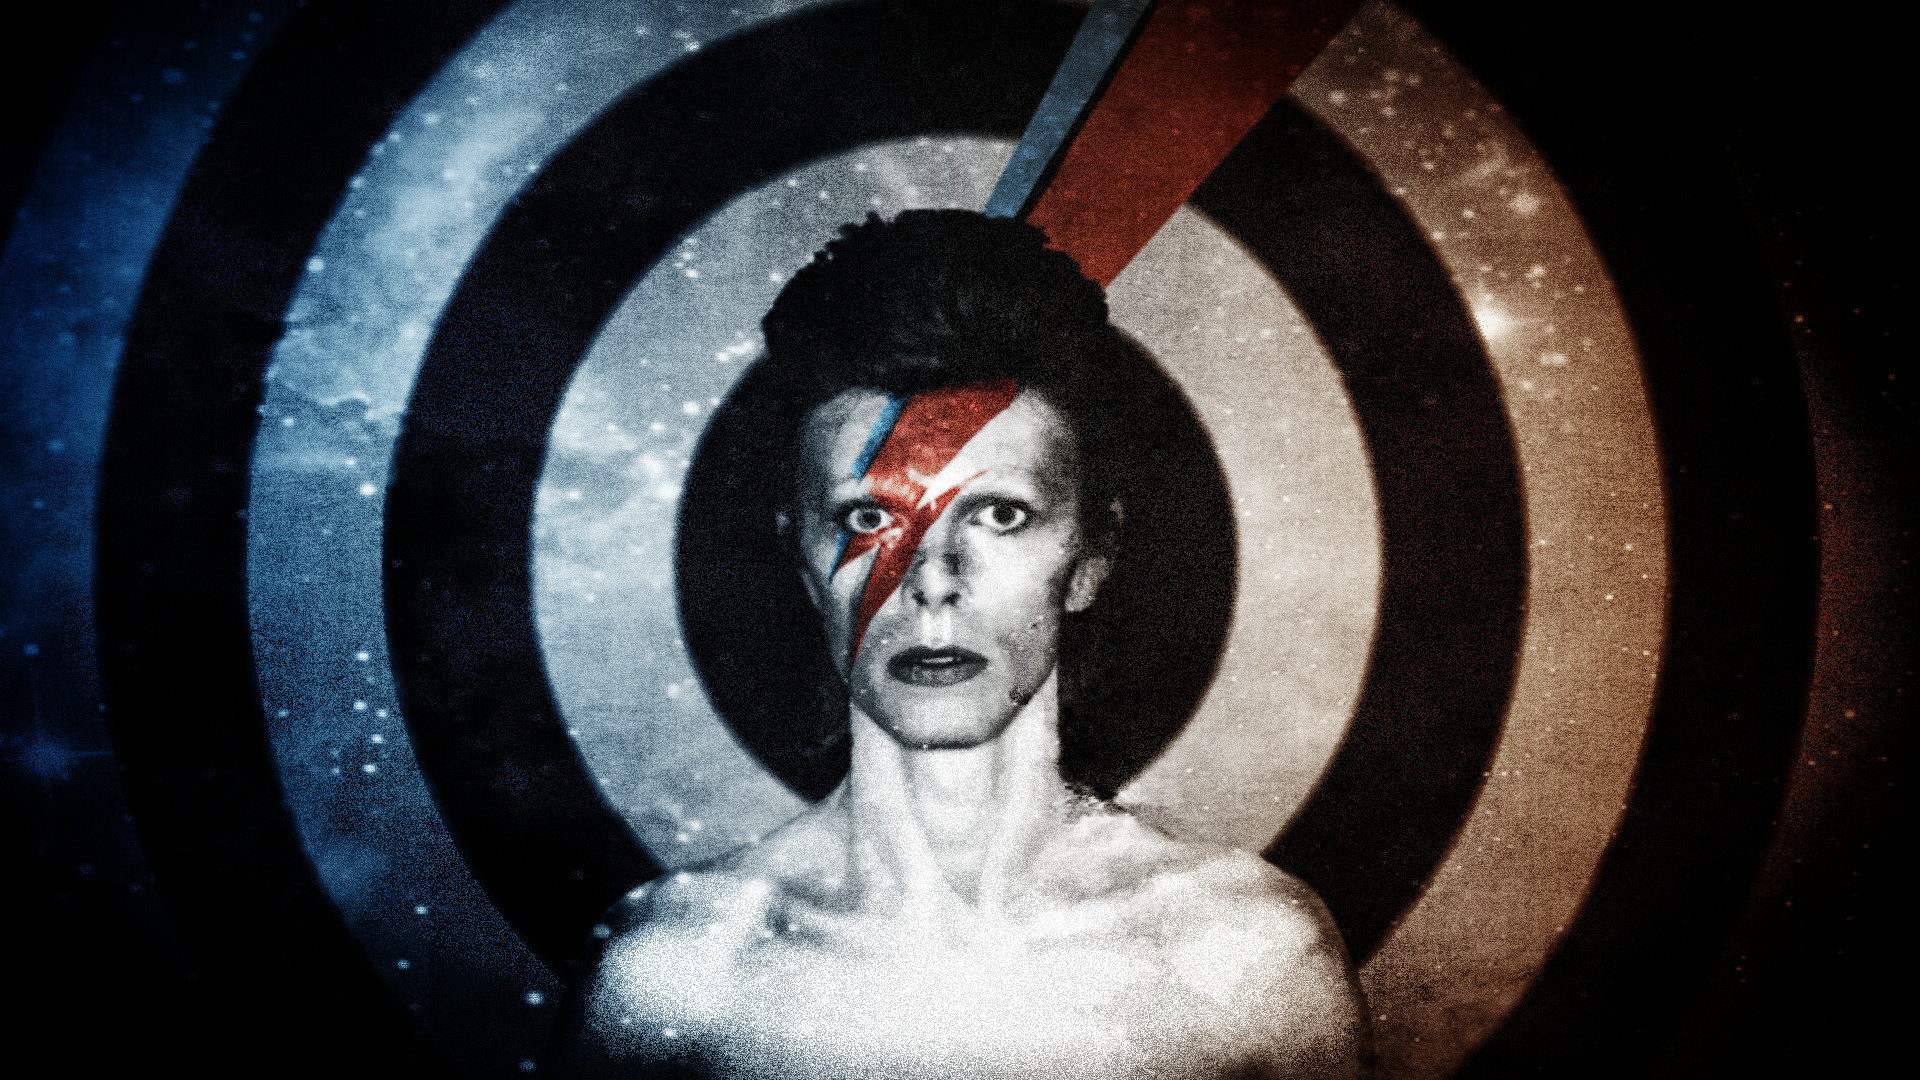 Download full hd 1080p David Bowie desktop background ID:135277 for free